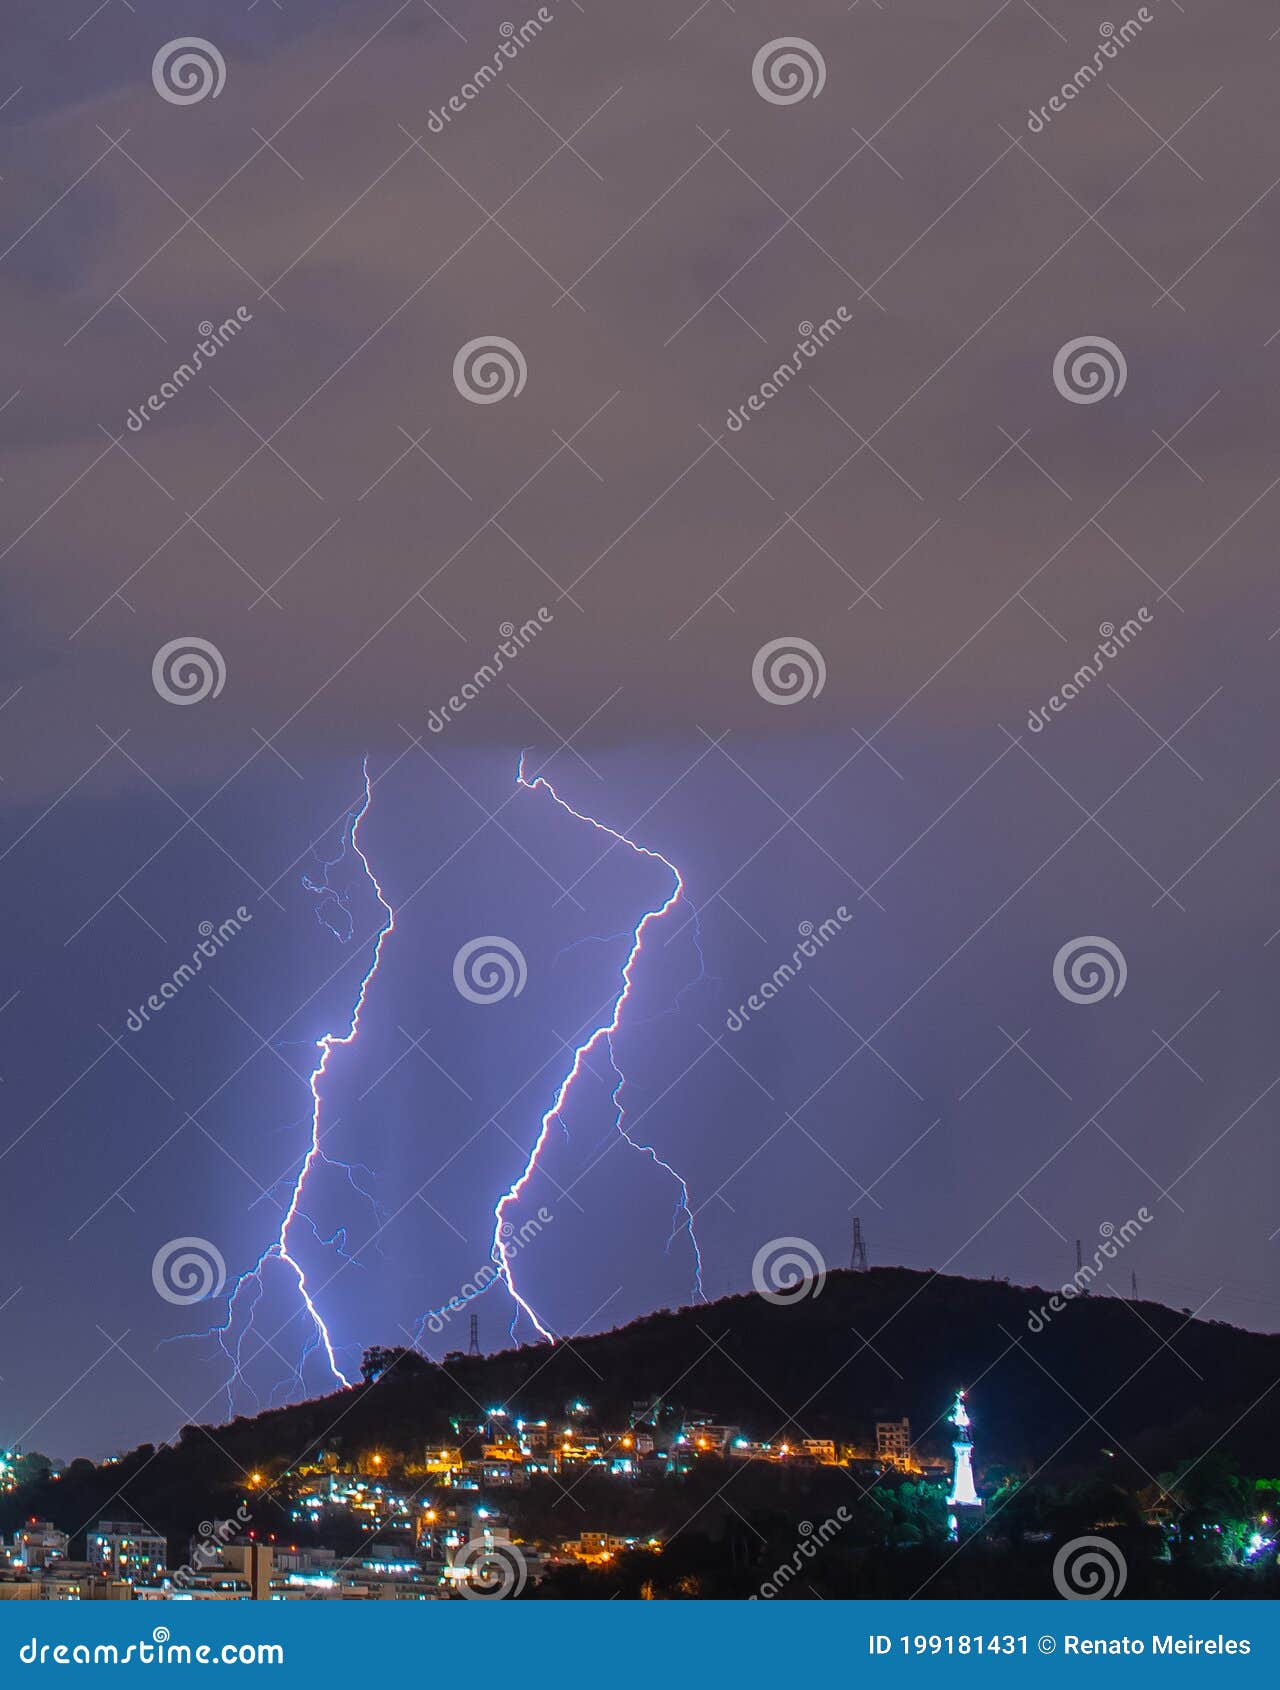 images of the arrival of a strong summer storm with lightning and rain. event in the city in the late afternoon, early evening in